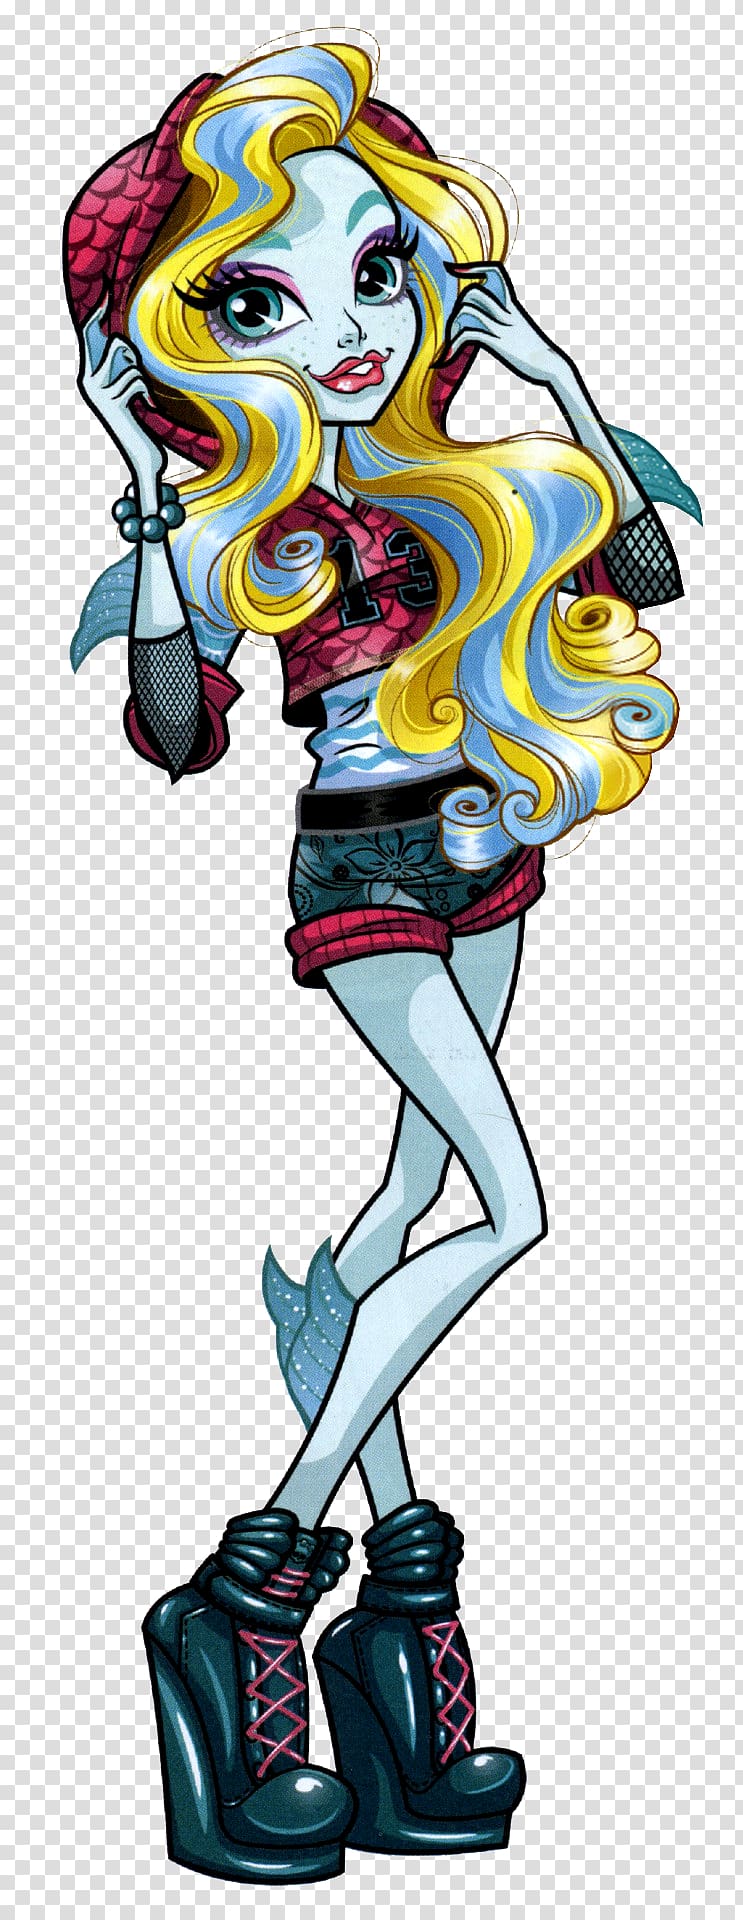 Lagoona Blue Monster High Clawdeen Wolf Frankie Stein Draculaura, monster transparent background PNG clipart